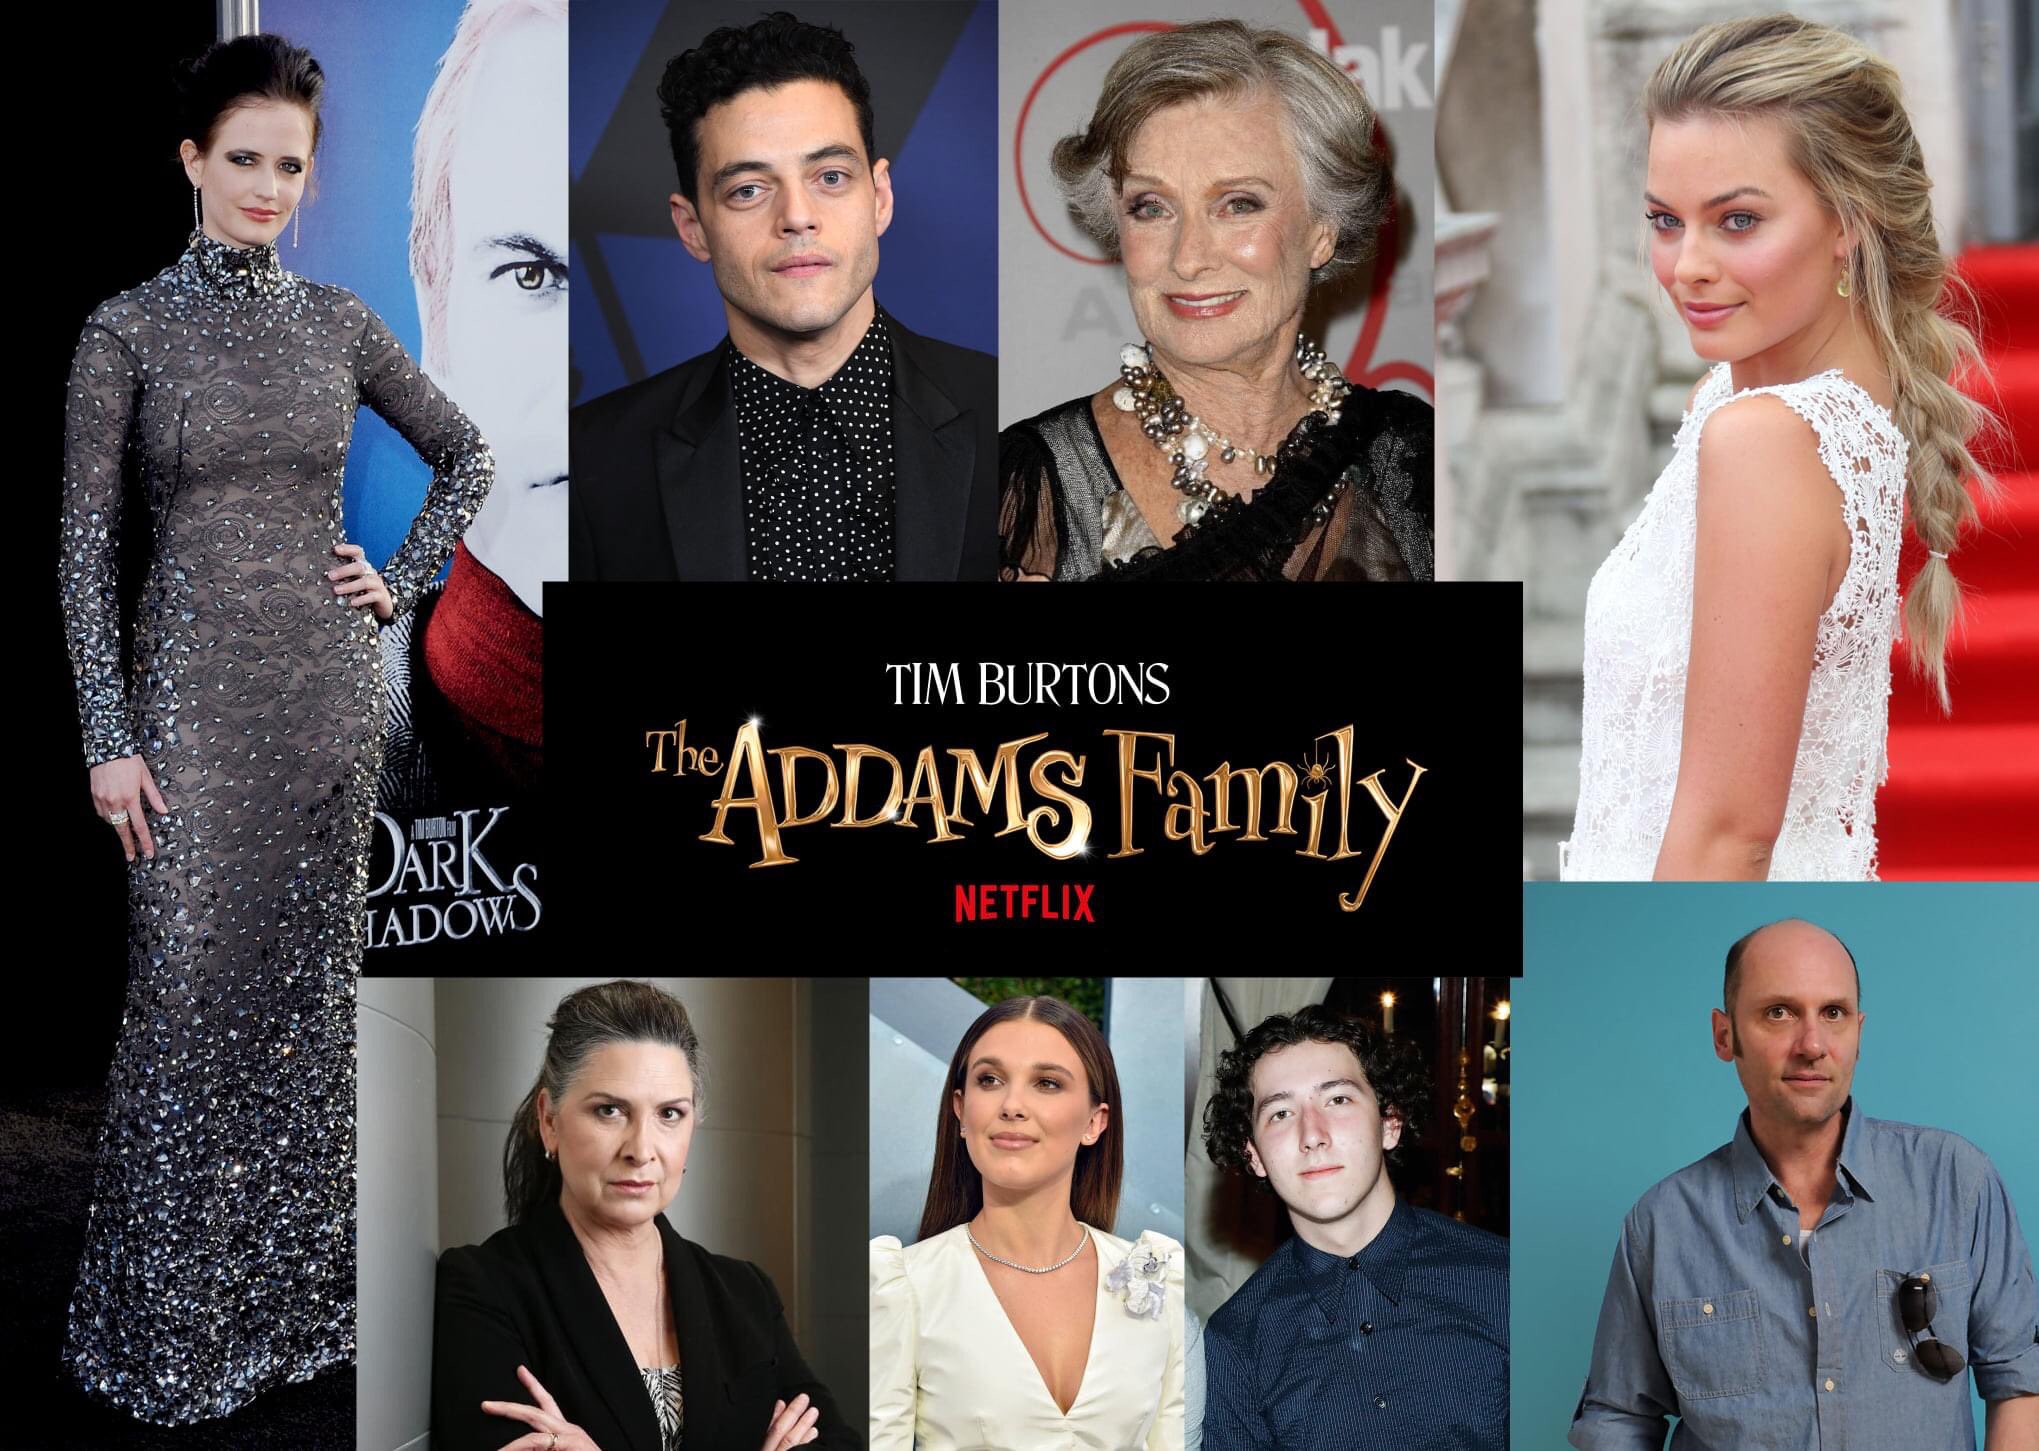 Netflix Updates on Twitter: "Tim Burton is supposedly set to bring brand new 10 part season of 'The Addams Family' to NETLIX Eva Green is alleged to have signed on